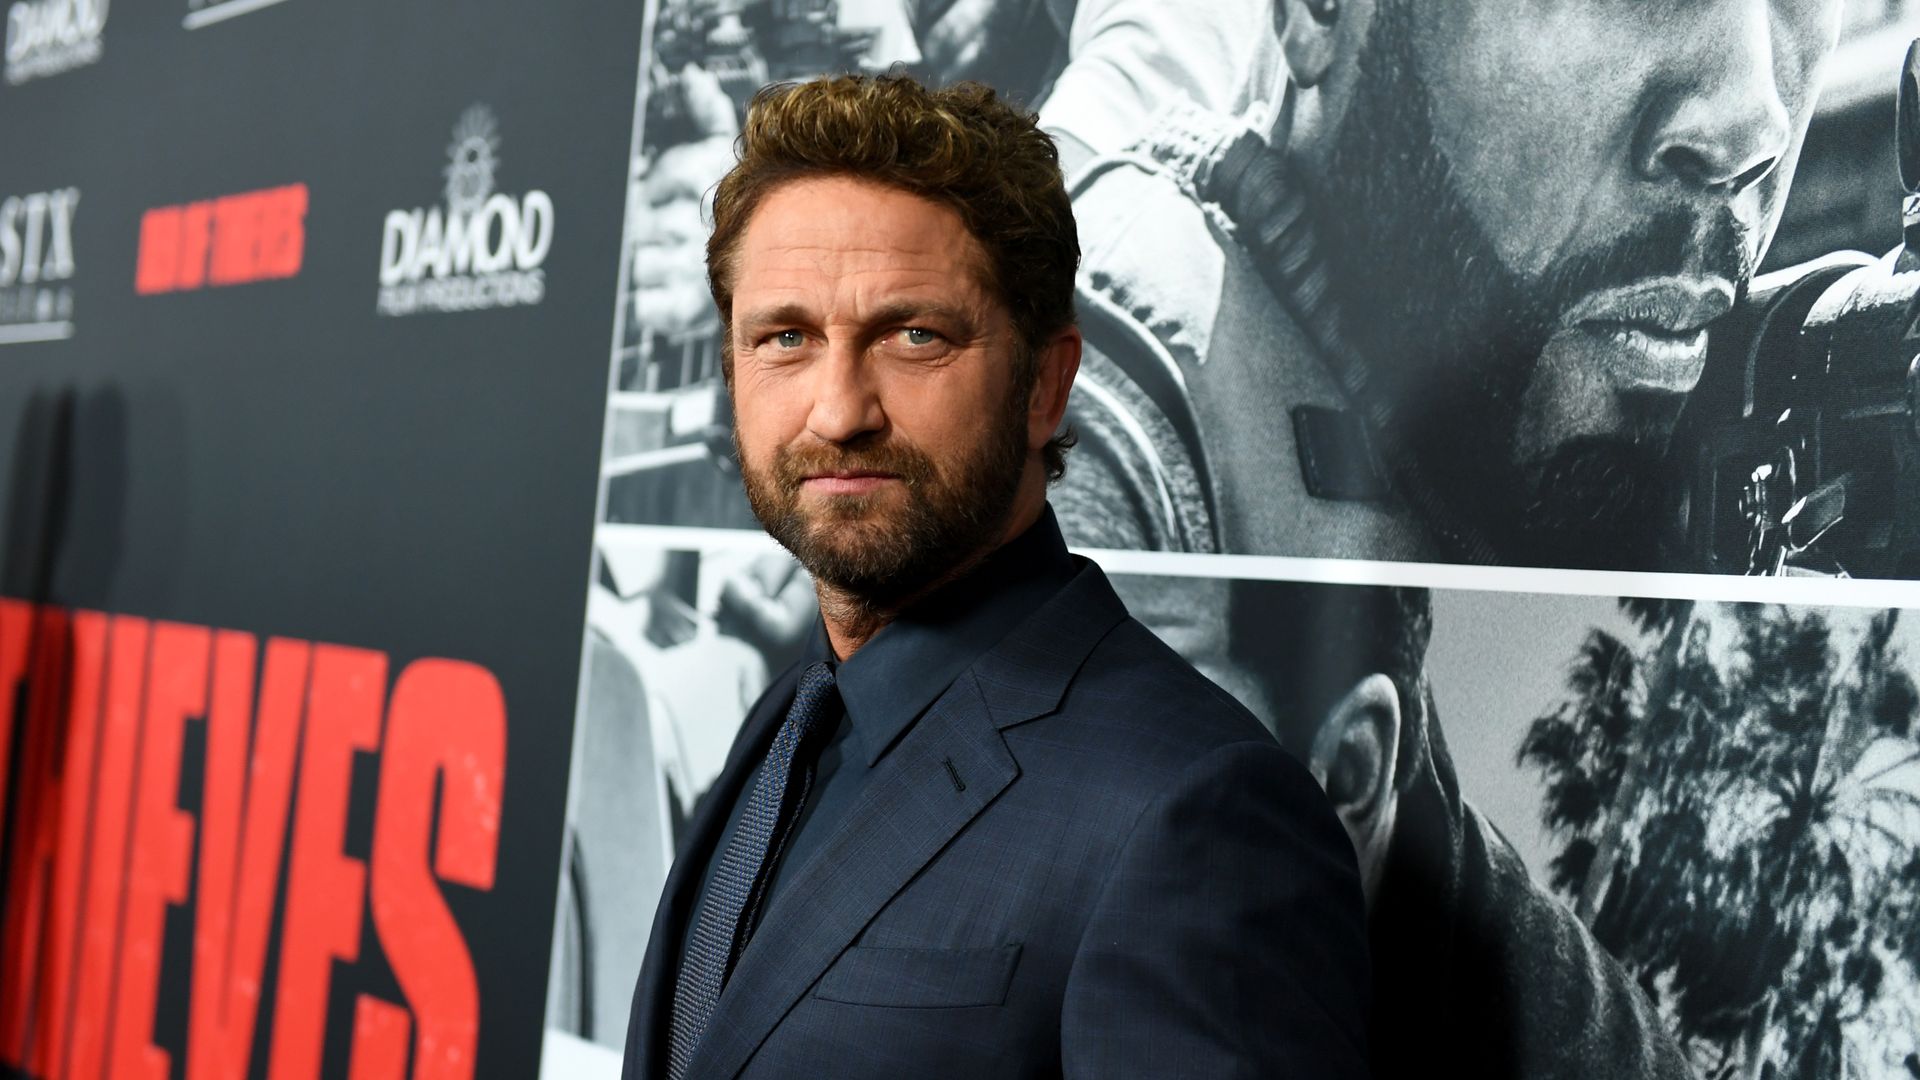 Gerard Butler attends the premiere of STX Films' "Den of Thieves" at Regal LA Live Stadium 14 on January 17, 2018 in Los Angeles, California